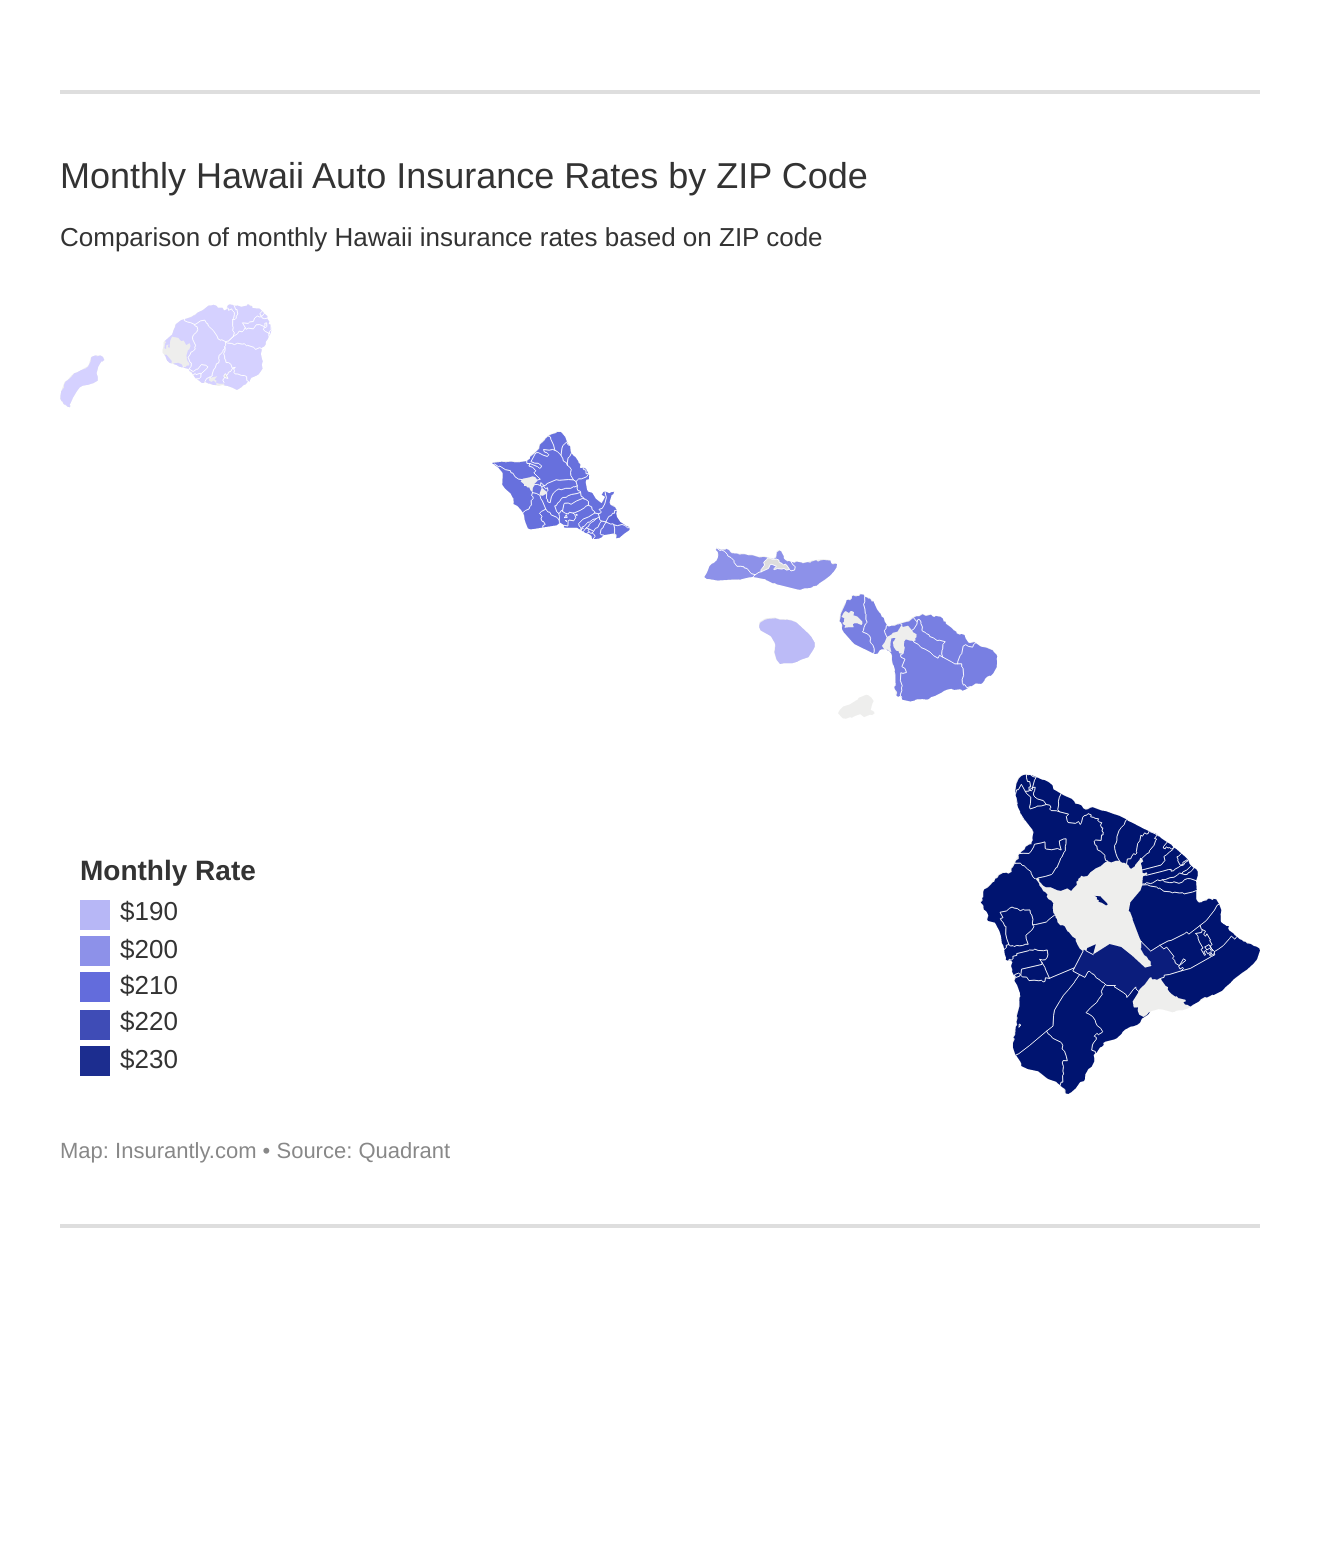 Monthly Hawaii Auto Insurance Rates by ZIP Code